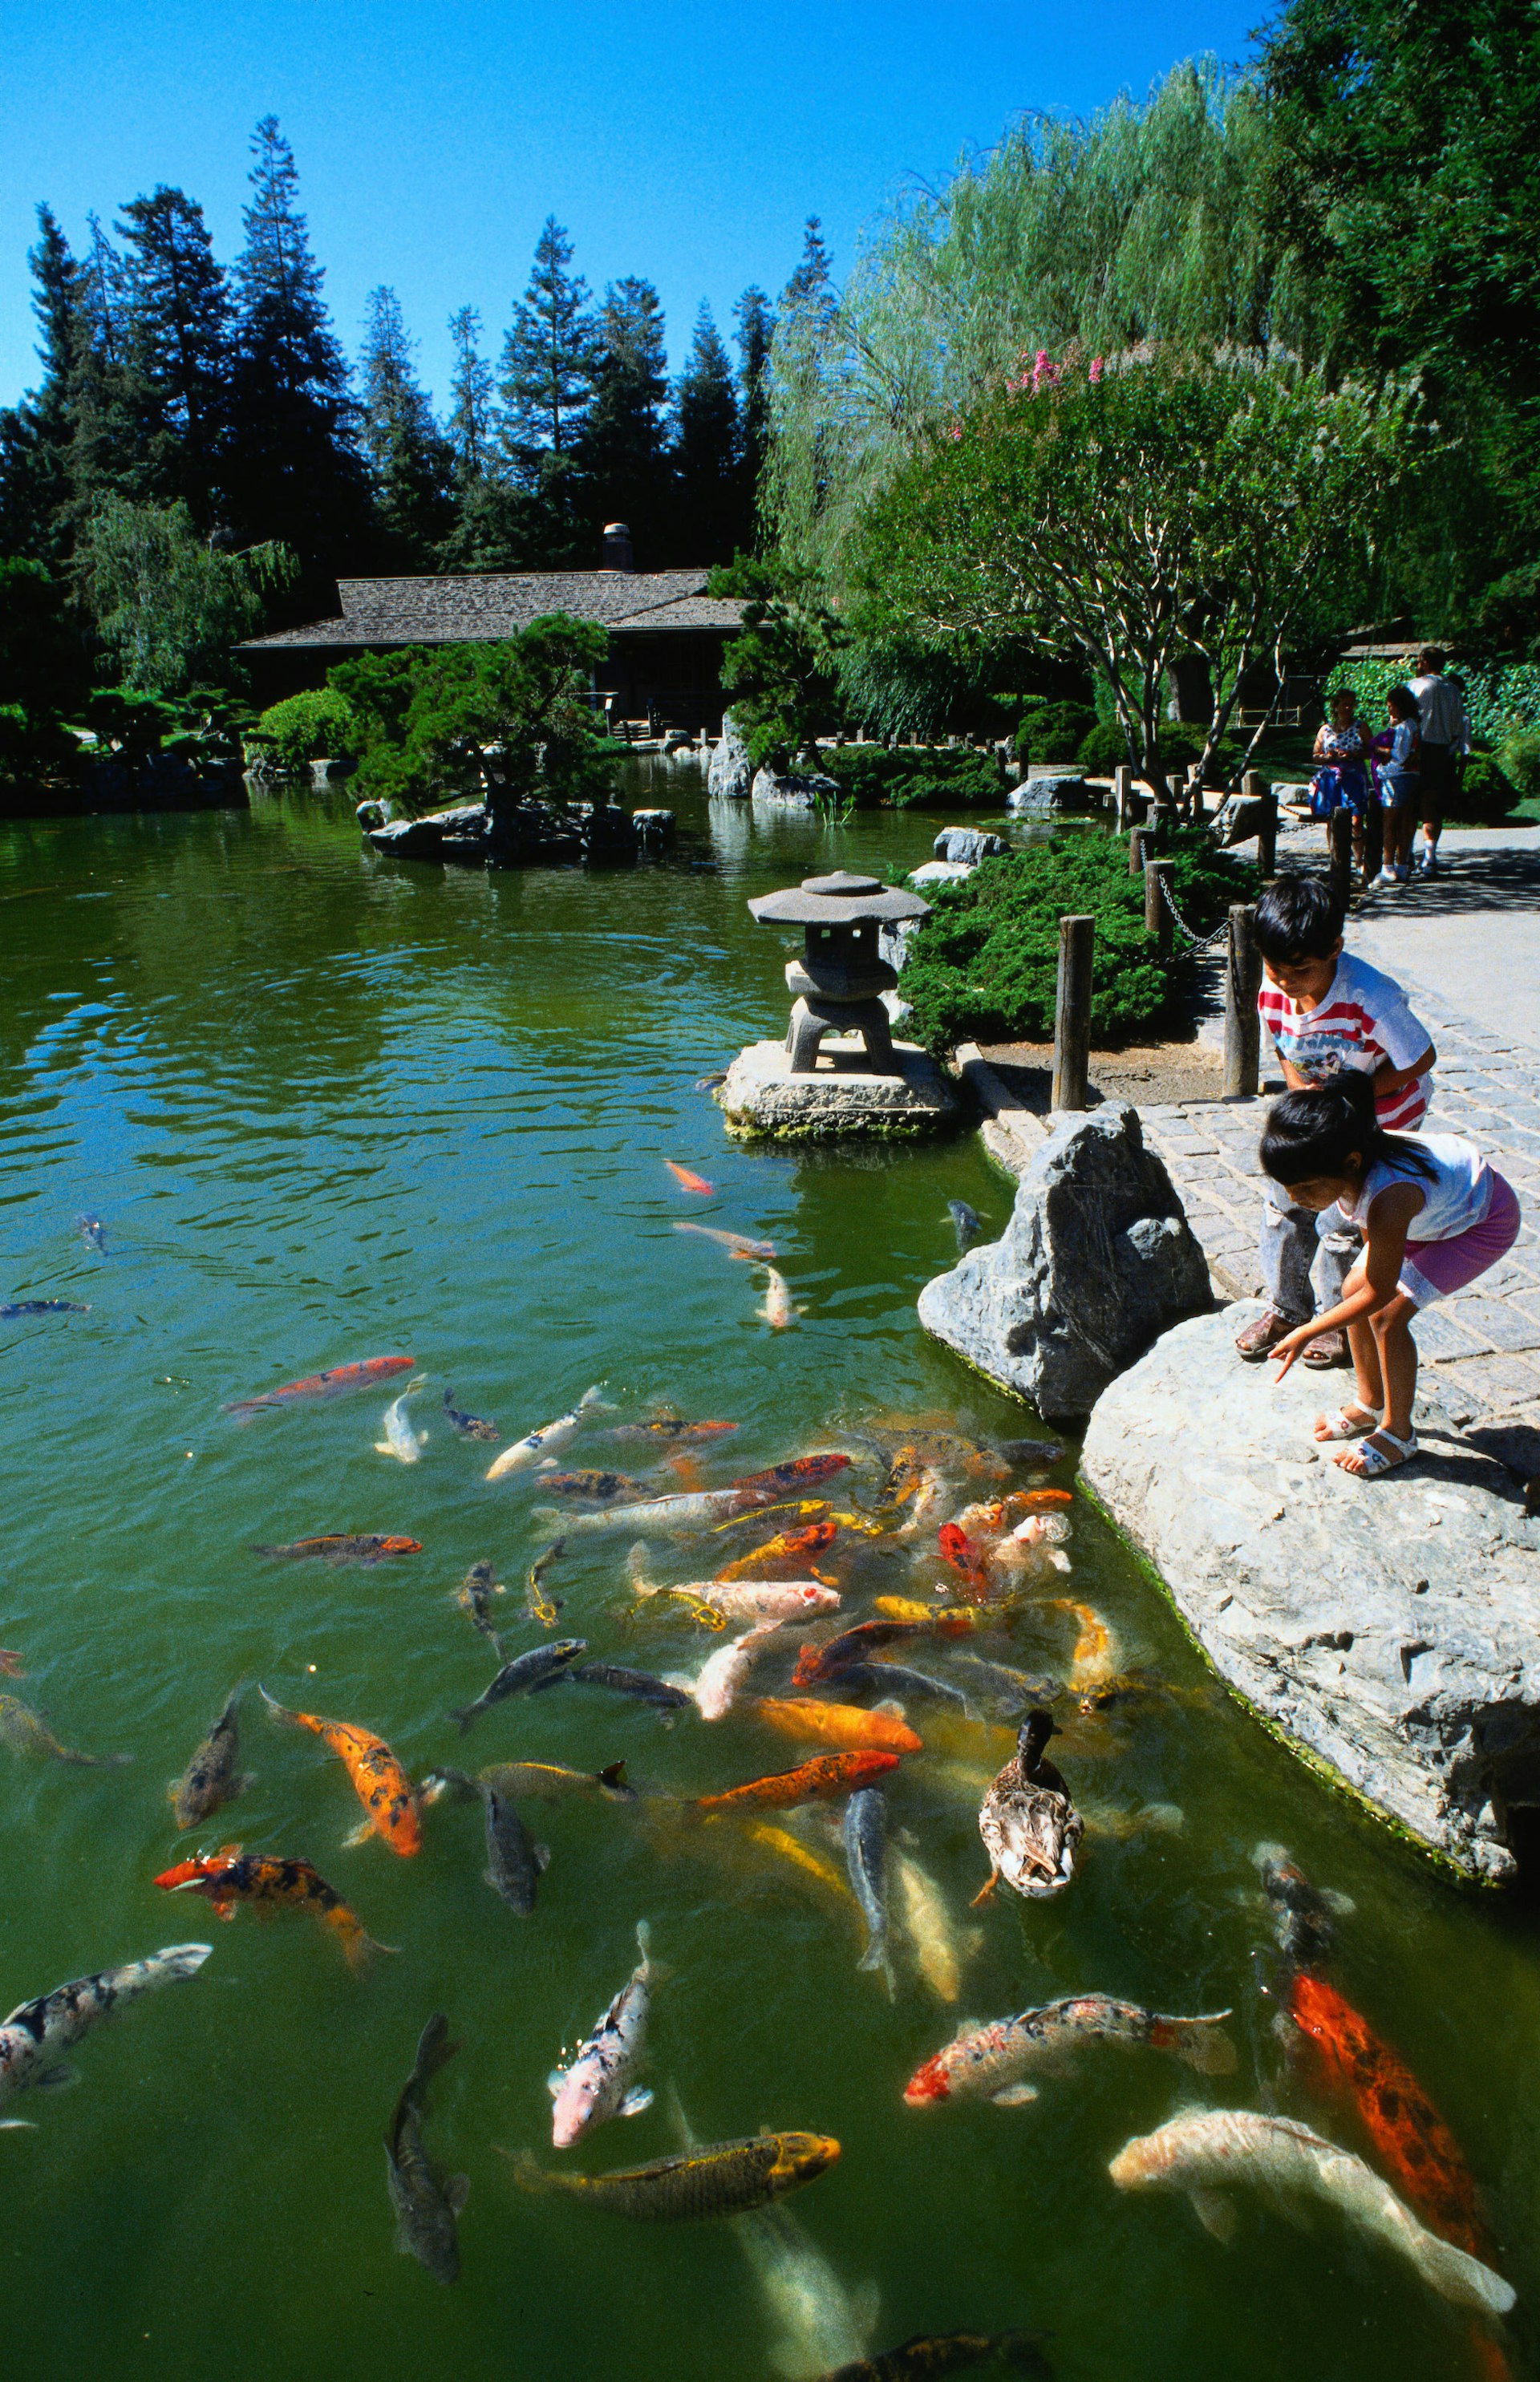 Children feed large gold-and-white fish in a pond